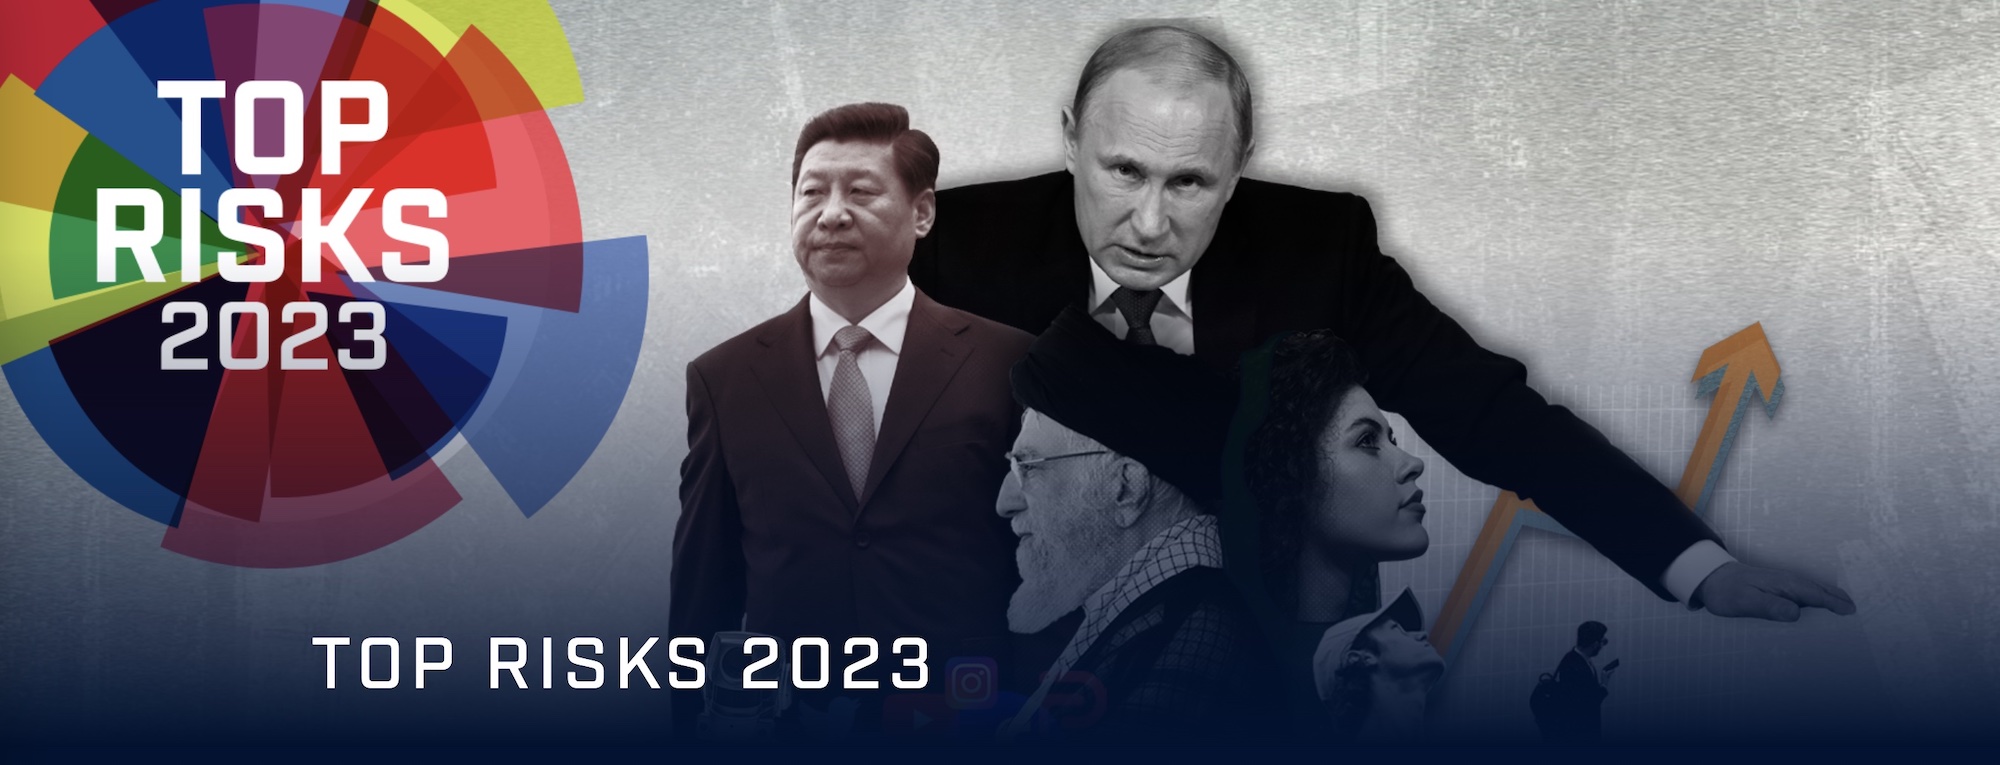 Eurasia Group publishes “Top Risks” predictions for 2023 CITI I/O